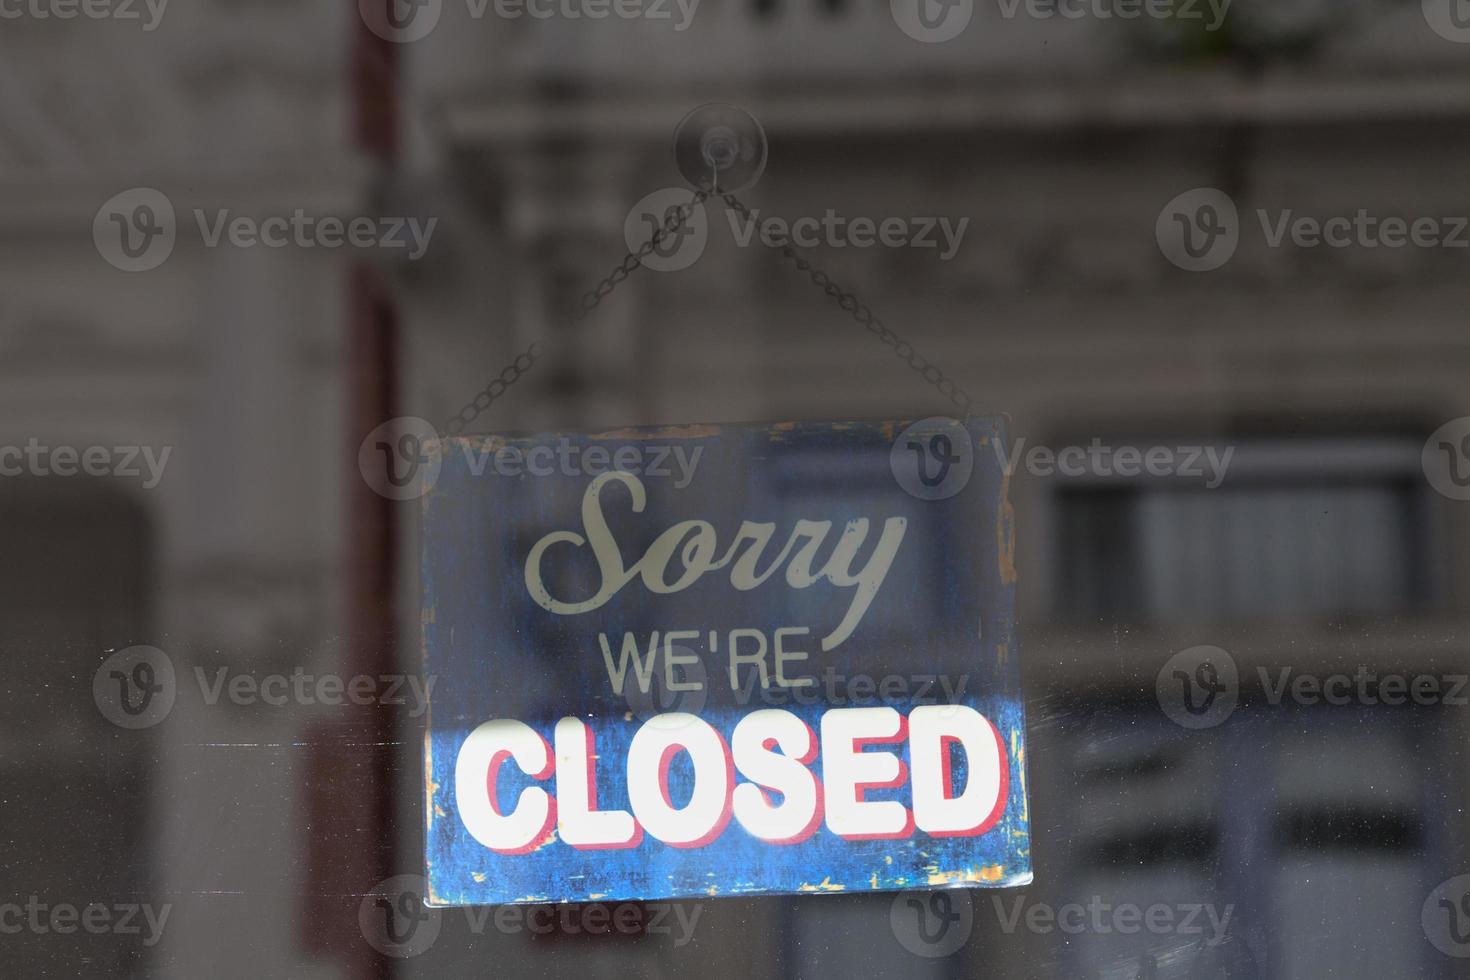 Sorry, we're closed - Closed sign photo